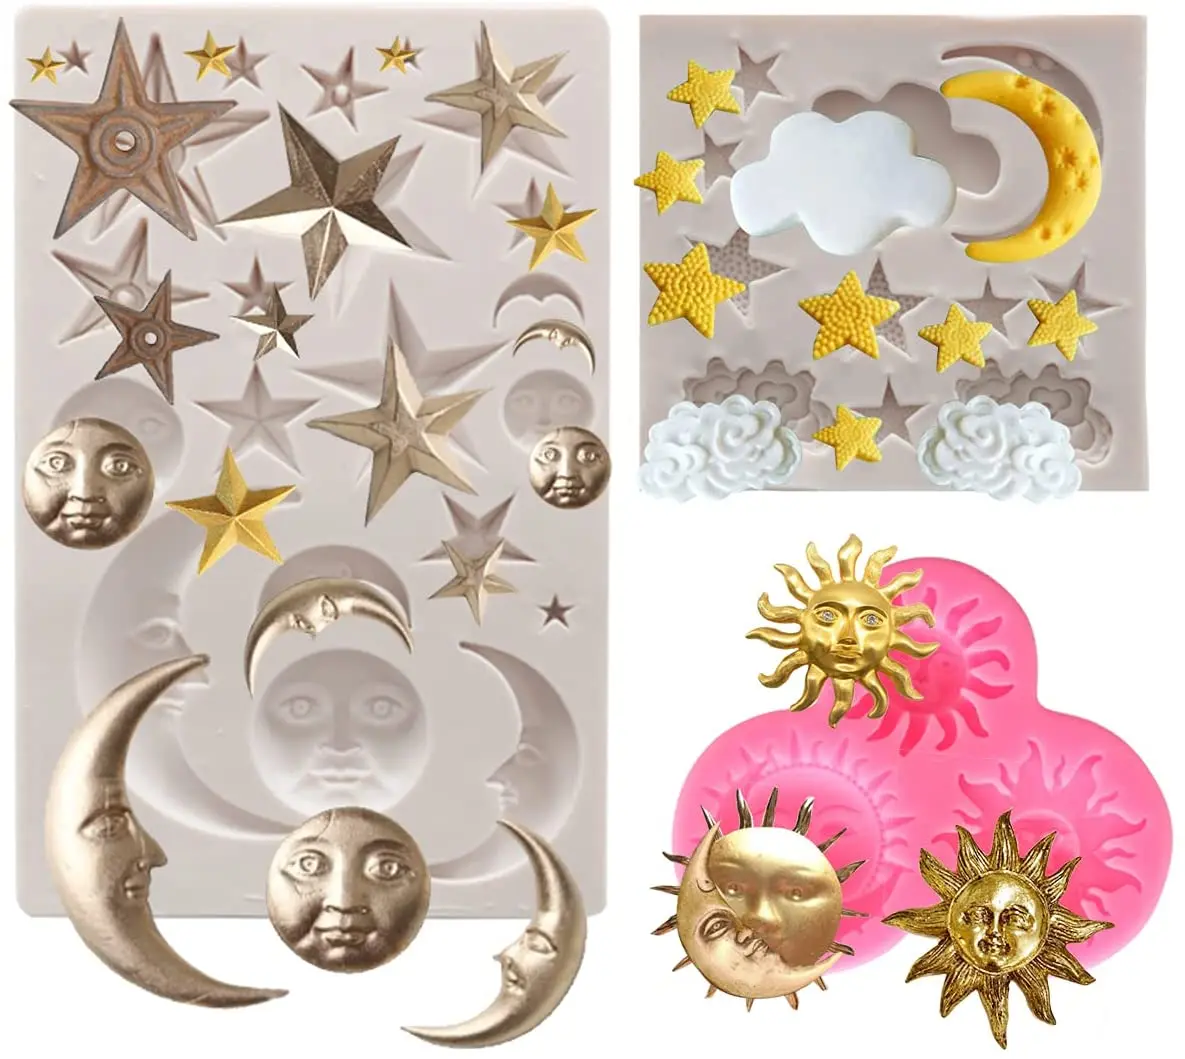 

Sun, Moon and Stars Silicone Fondant Cake Mold for Sun Moon Star Theme Party and Wedding Chocolate Candy Decorations